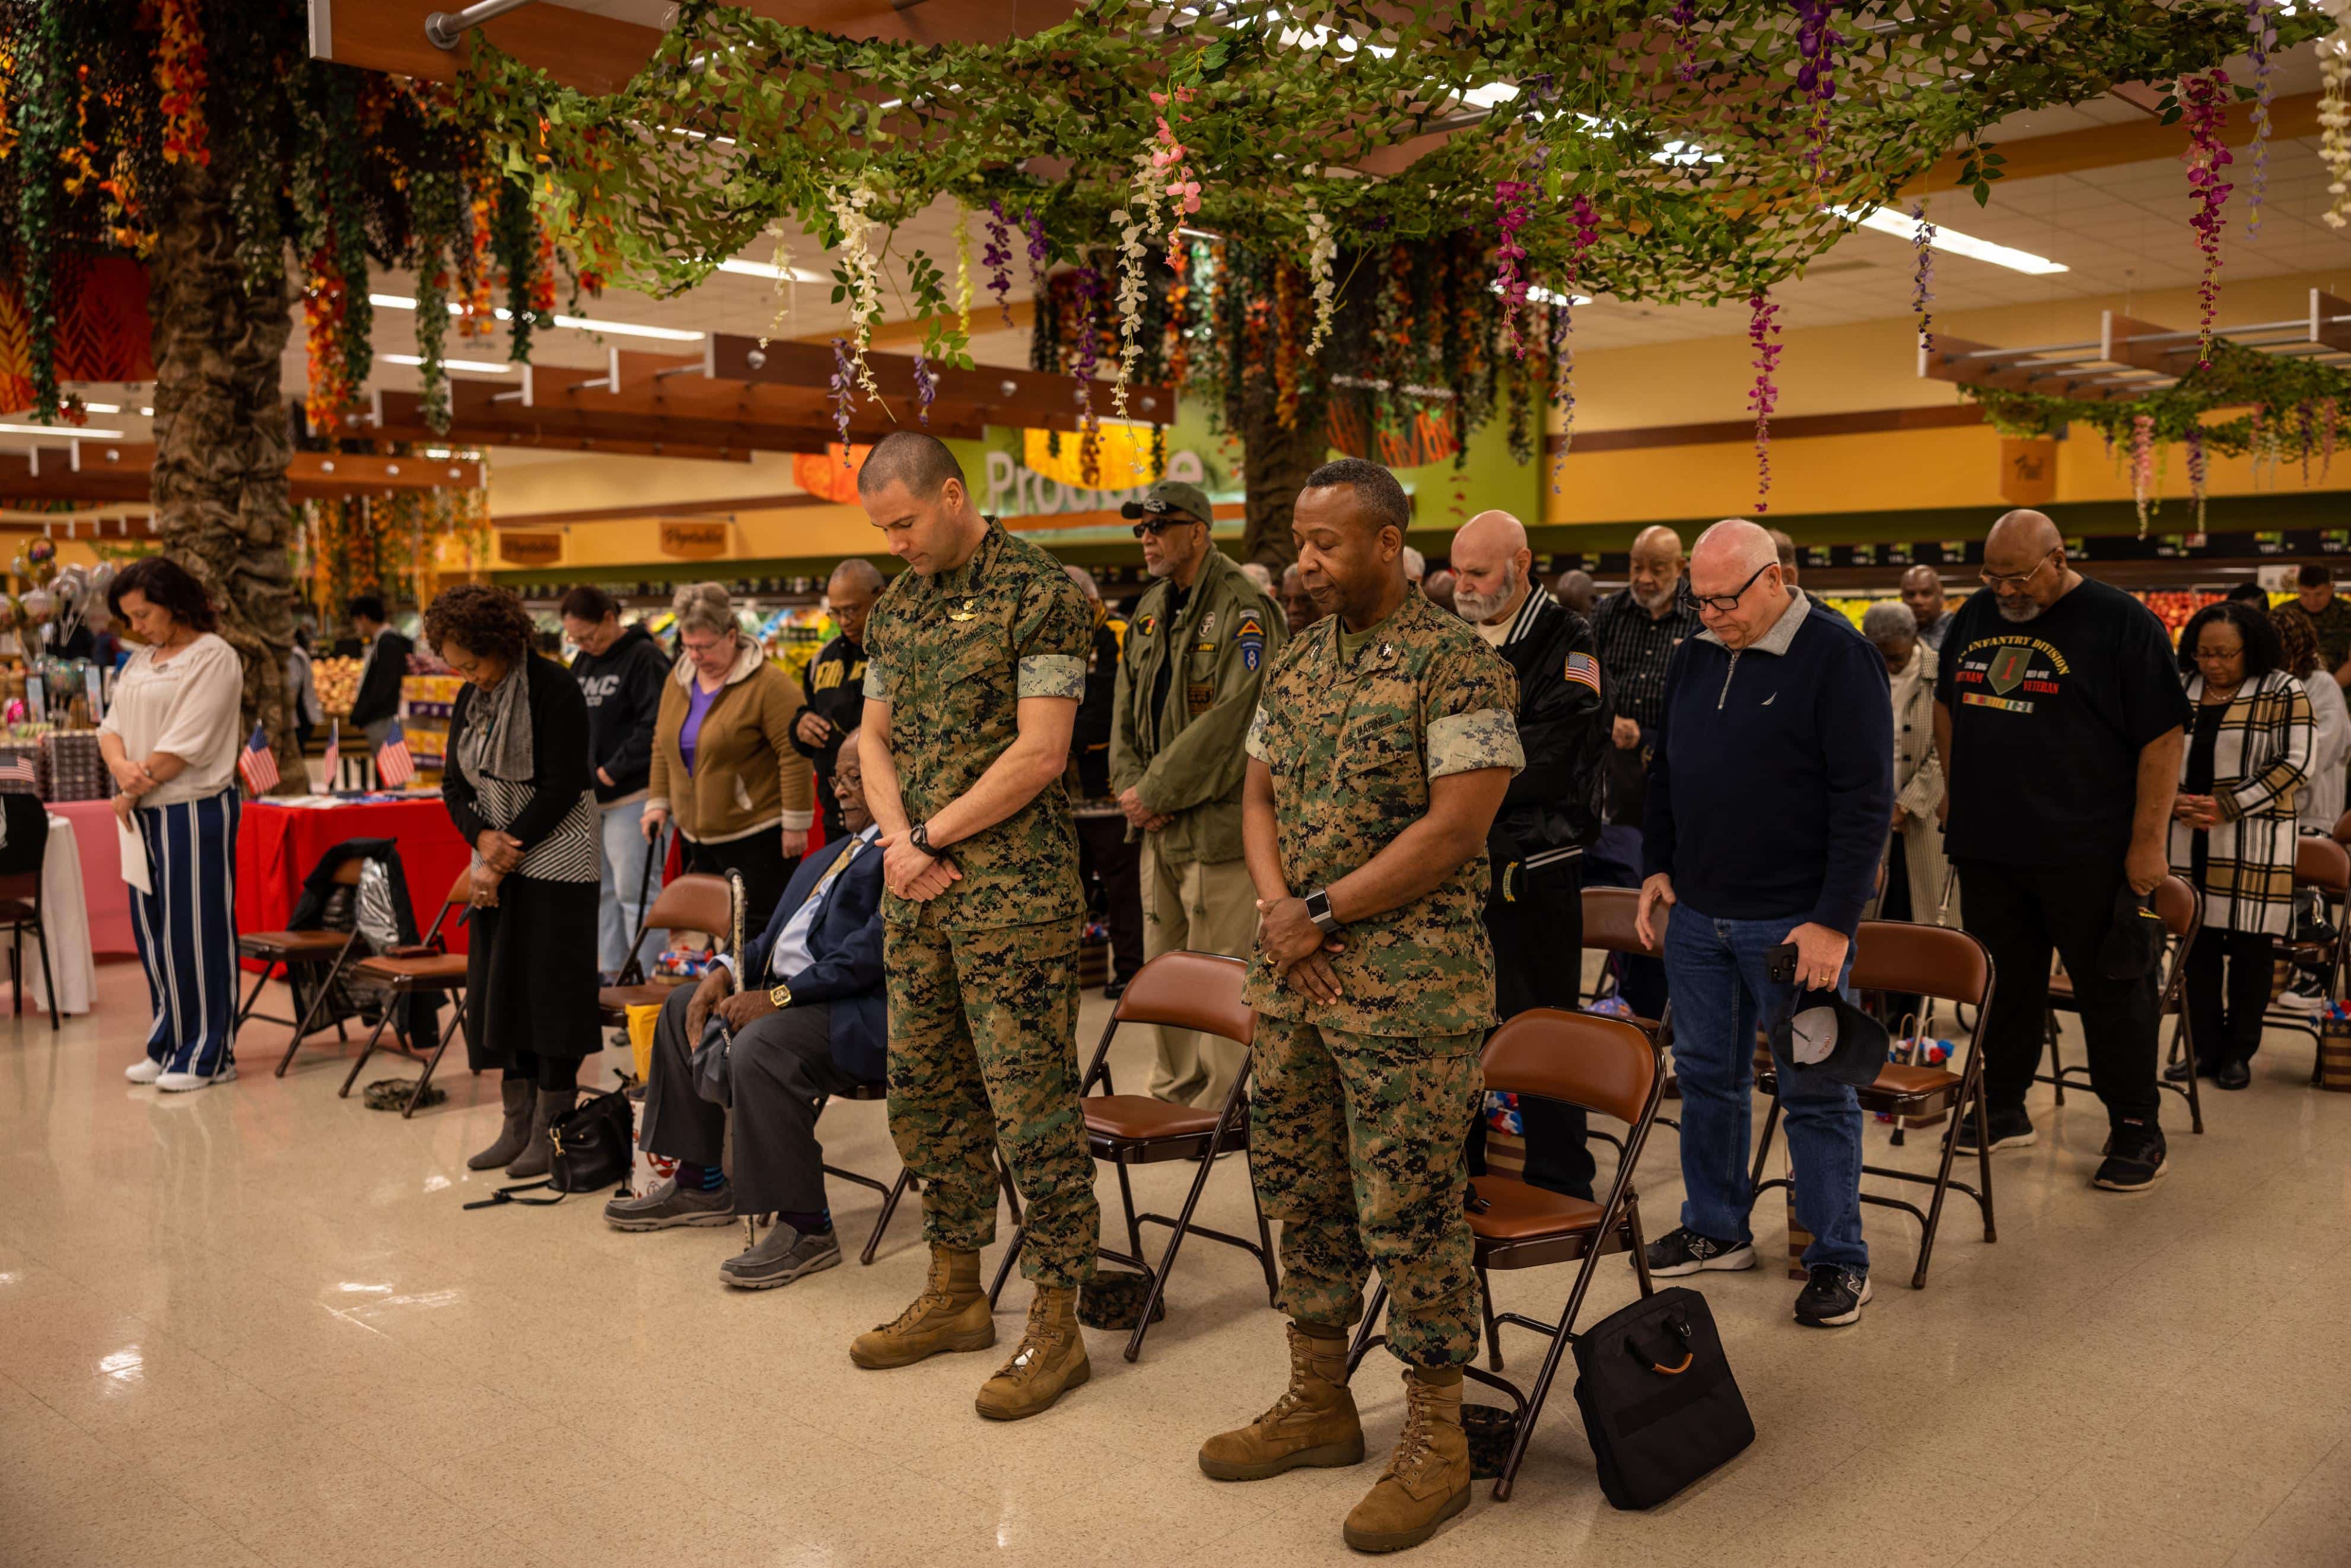 U.S. Marine Corps Sgt. Maj. Collin D. Barry, sergeant major, Marine Corps Base Quantico, left, and U.S. Marine Corps Col. Michael L. Brooks, base commander, MCB Quantico, right, bow their heads in prayer with Vietnam War veterans during the National Vietnam War Veterans Day commemoration ceremony at MCB Quantico, Virginia, March 29, 2023. In 2017, President Donald Trump declared National Vietnam War Veterans Day because on this day in 1973, U.S. combat troops departed the Republic of Vietnam. (U.S. Marine Corps photo by Lance Cpl. Joaquin Dela Torre)